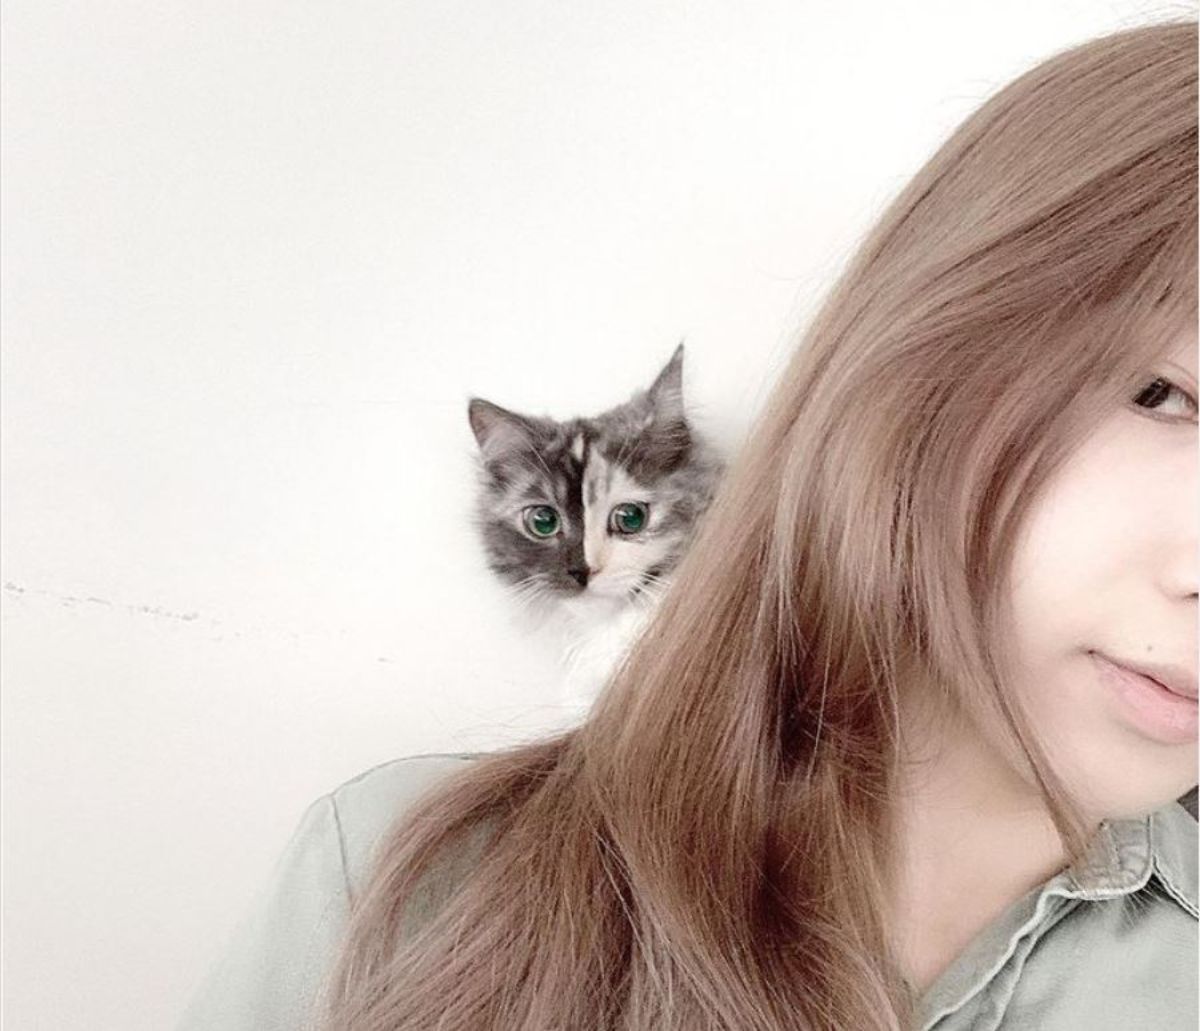 fluffy kitten with right side of face being grey and left side being black on a woman's shoulder and peeking from behind her hair